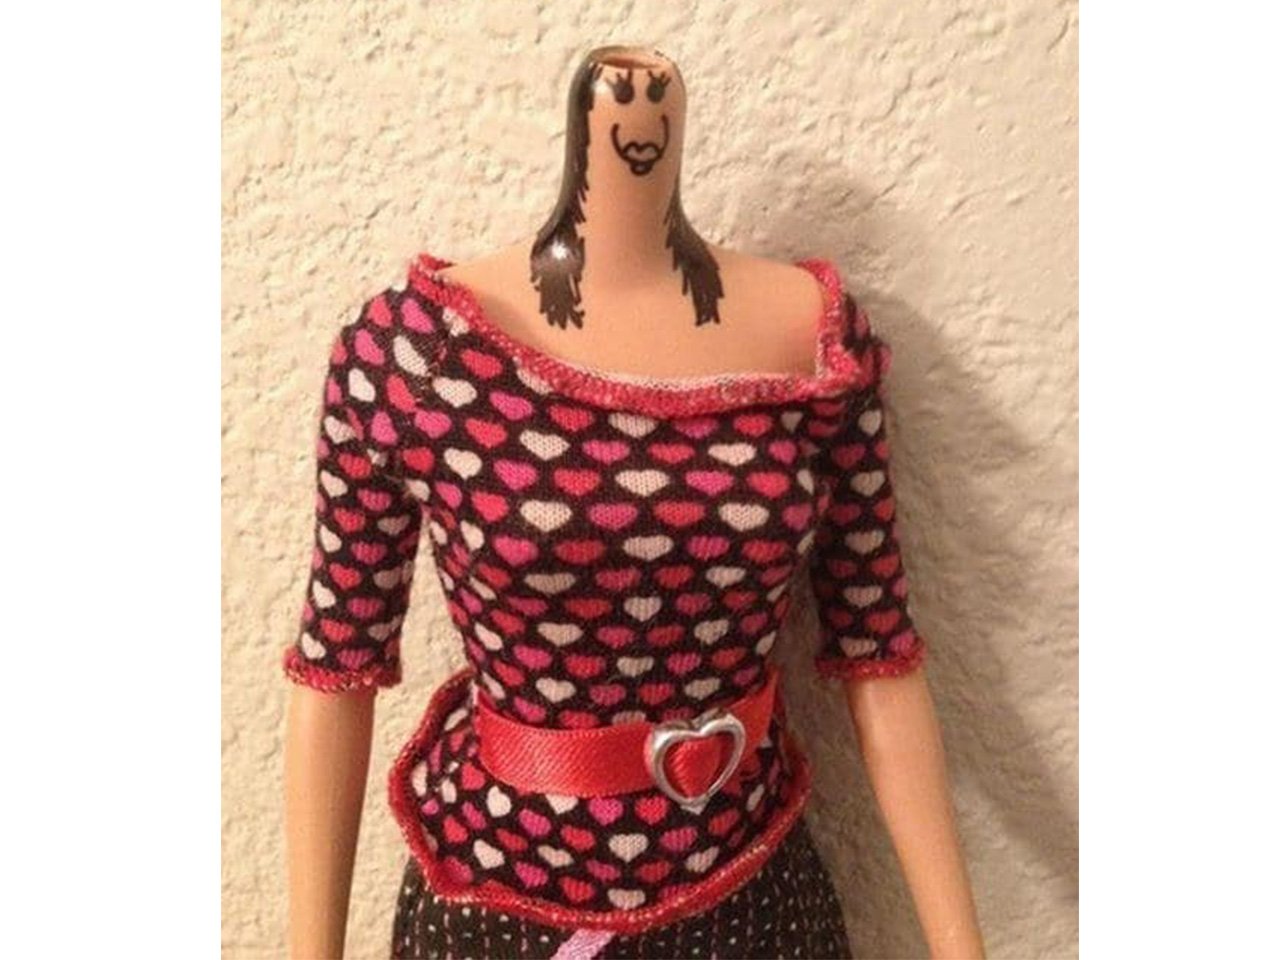 Barbie with head popped off and a creepy face drawn on neck